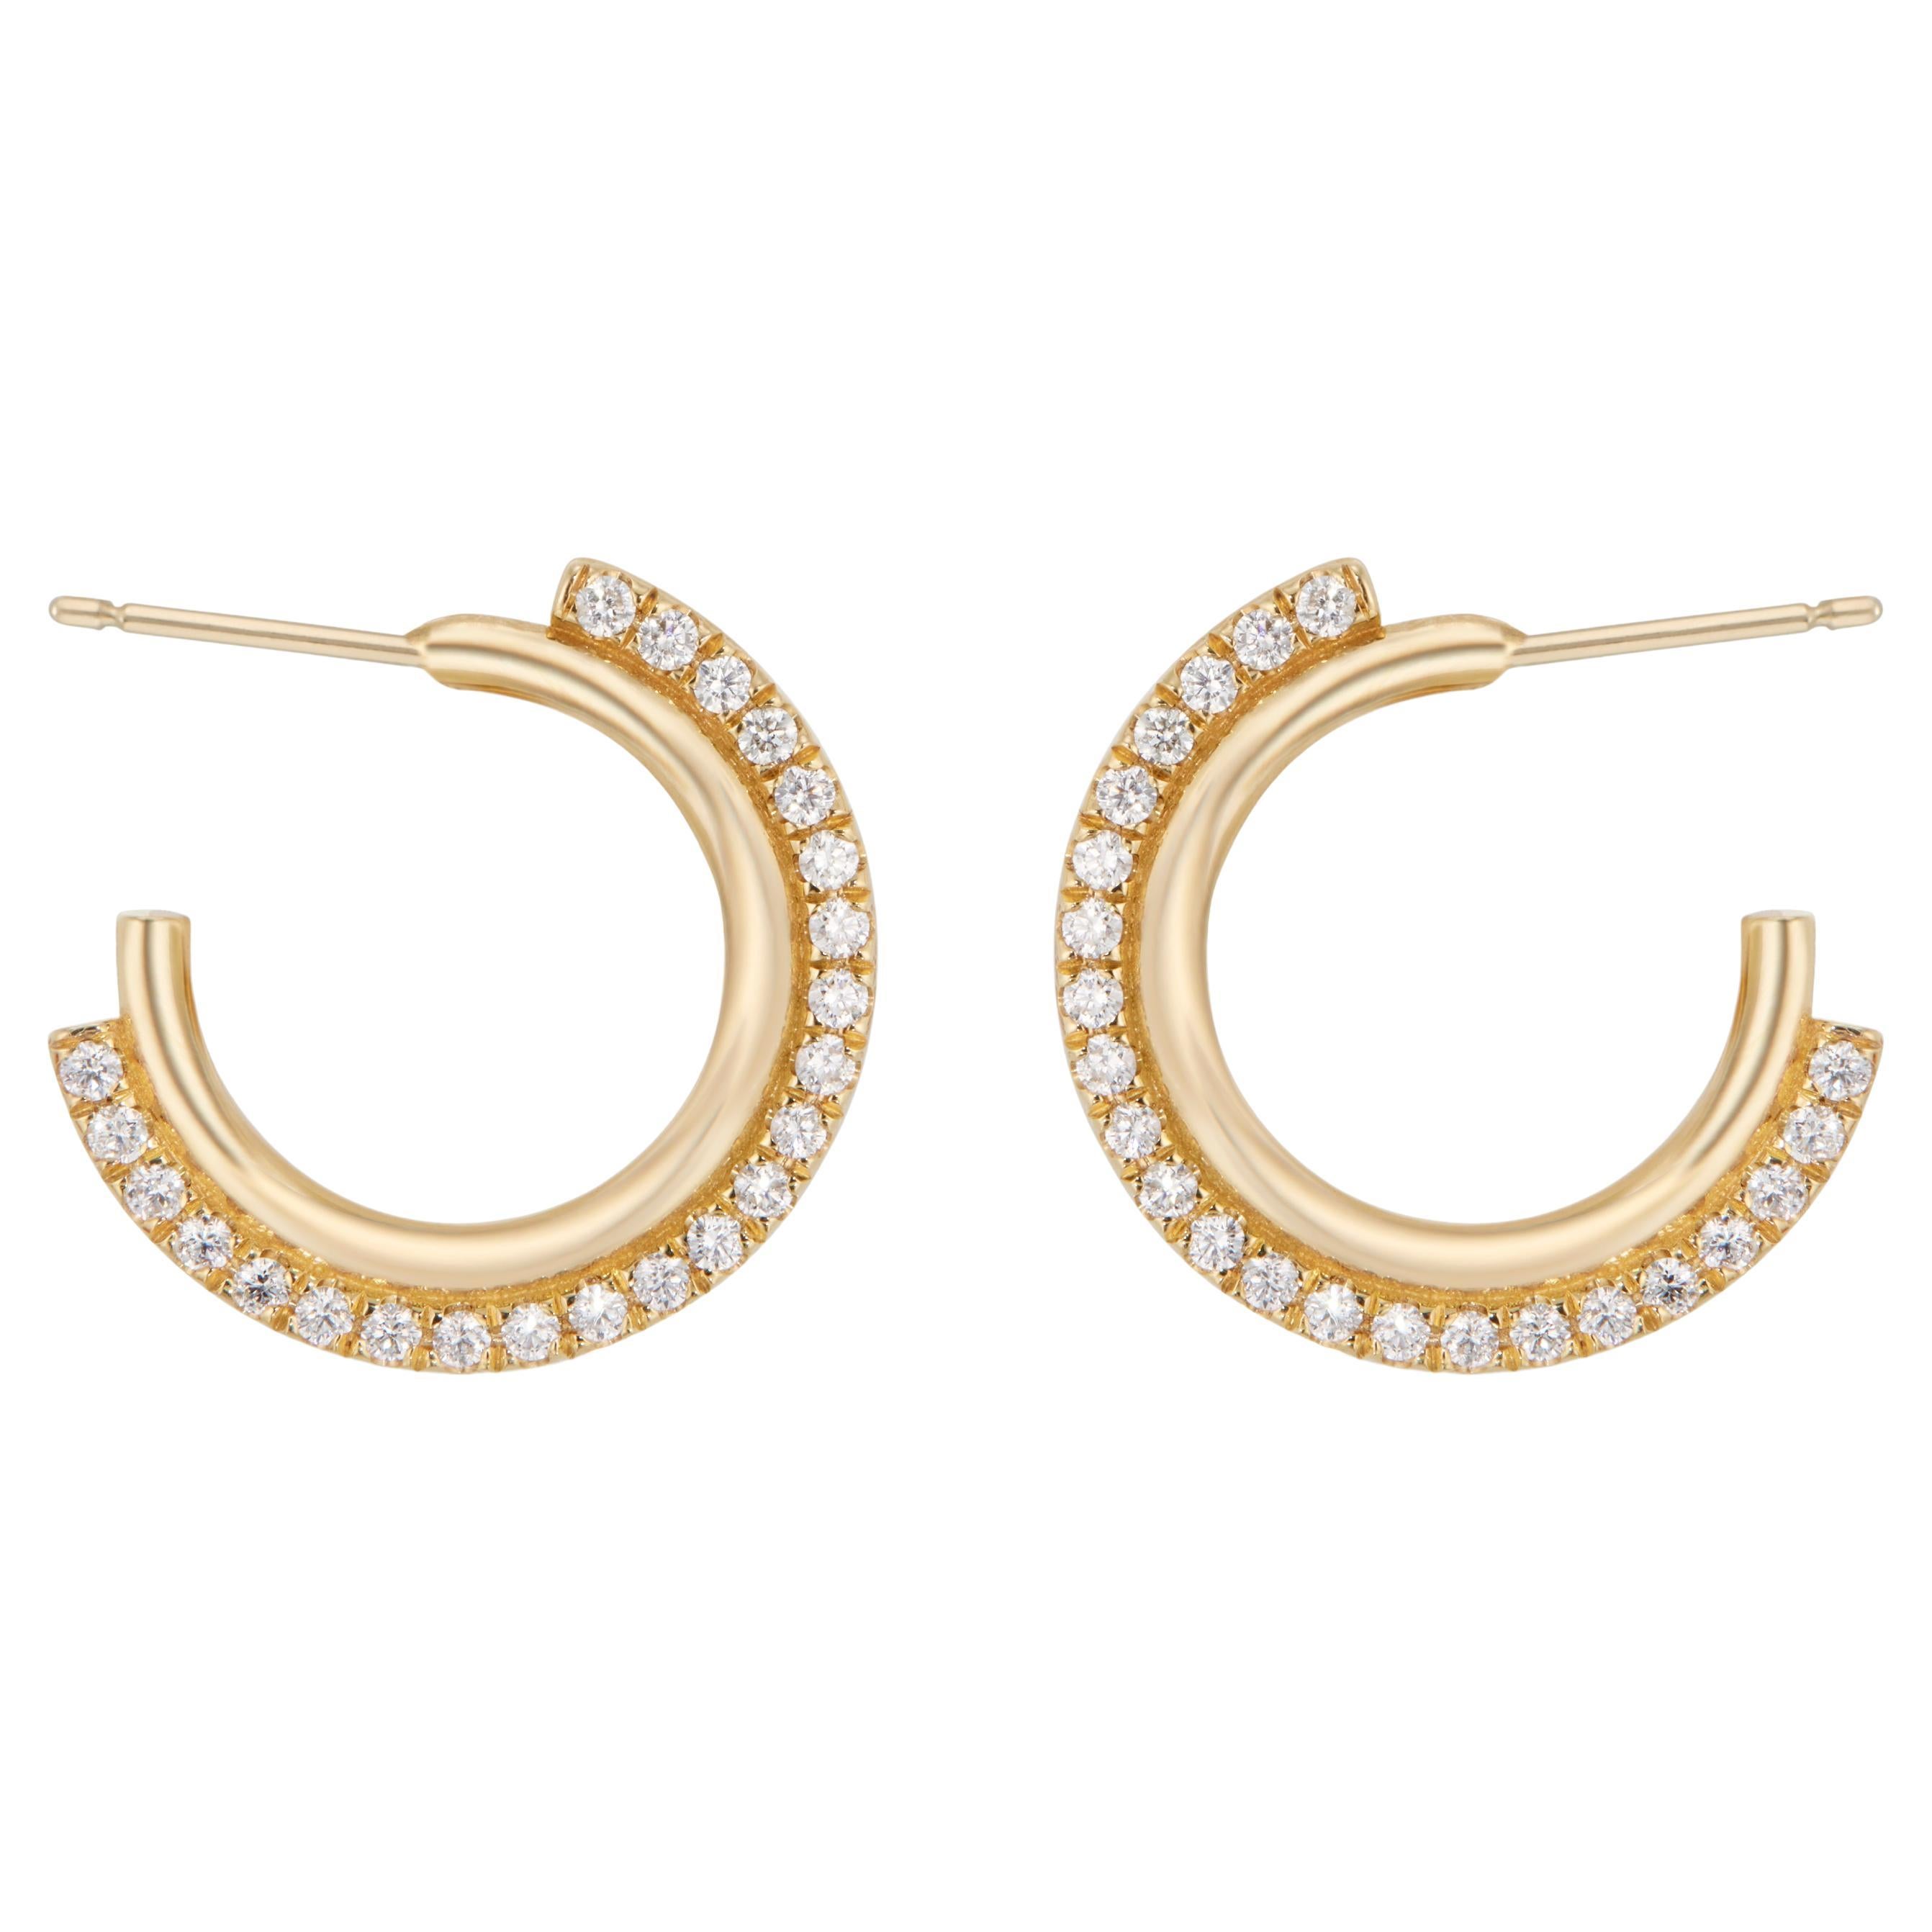 Casey Perez 14k Banded Gold Arc Hoops  with .58 carats of Brilliant Cut Diamonds For Sale